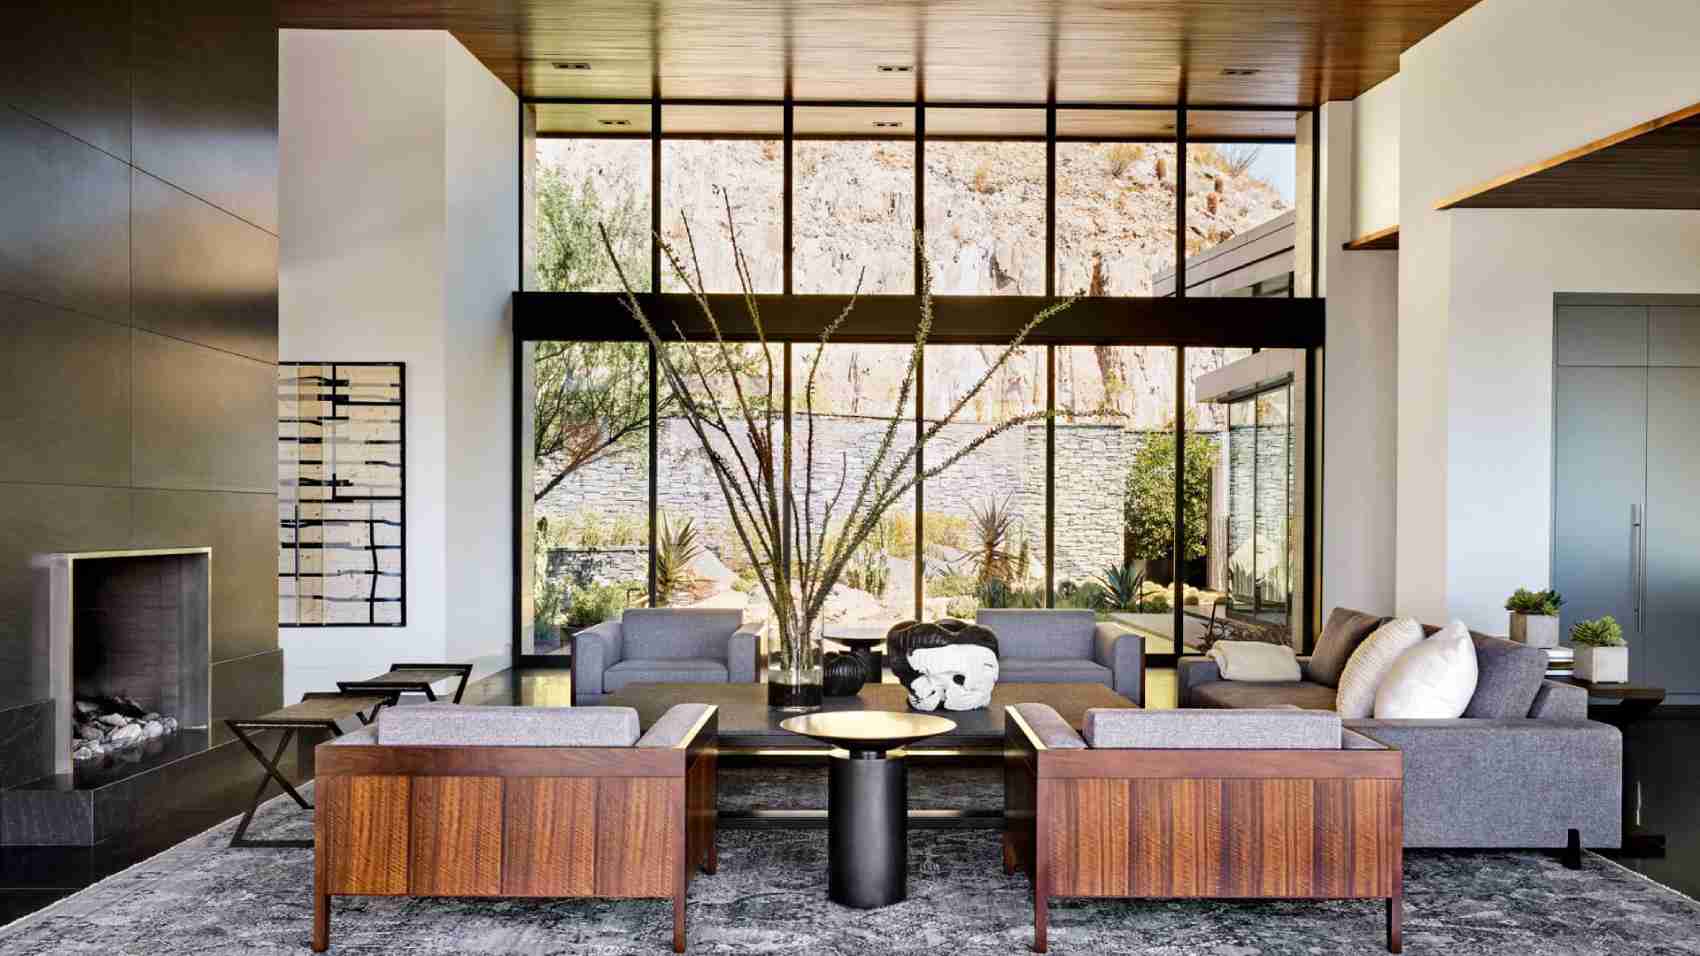 Great room interior design anita lang and architect mark candelaria in paradise valley.